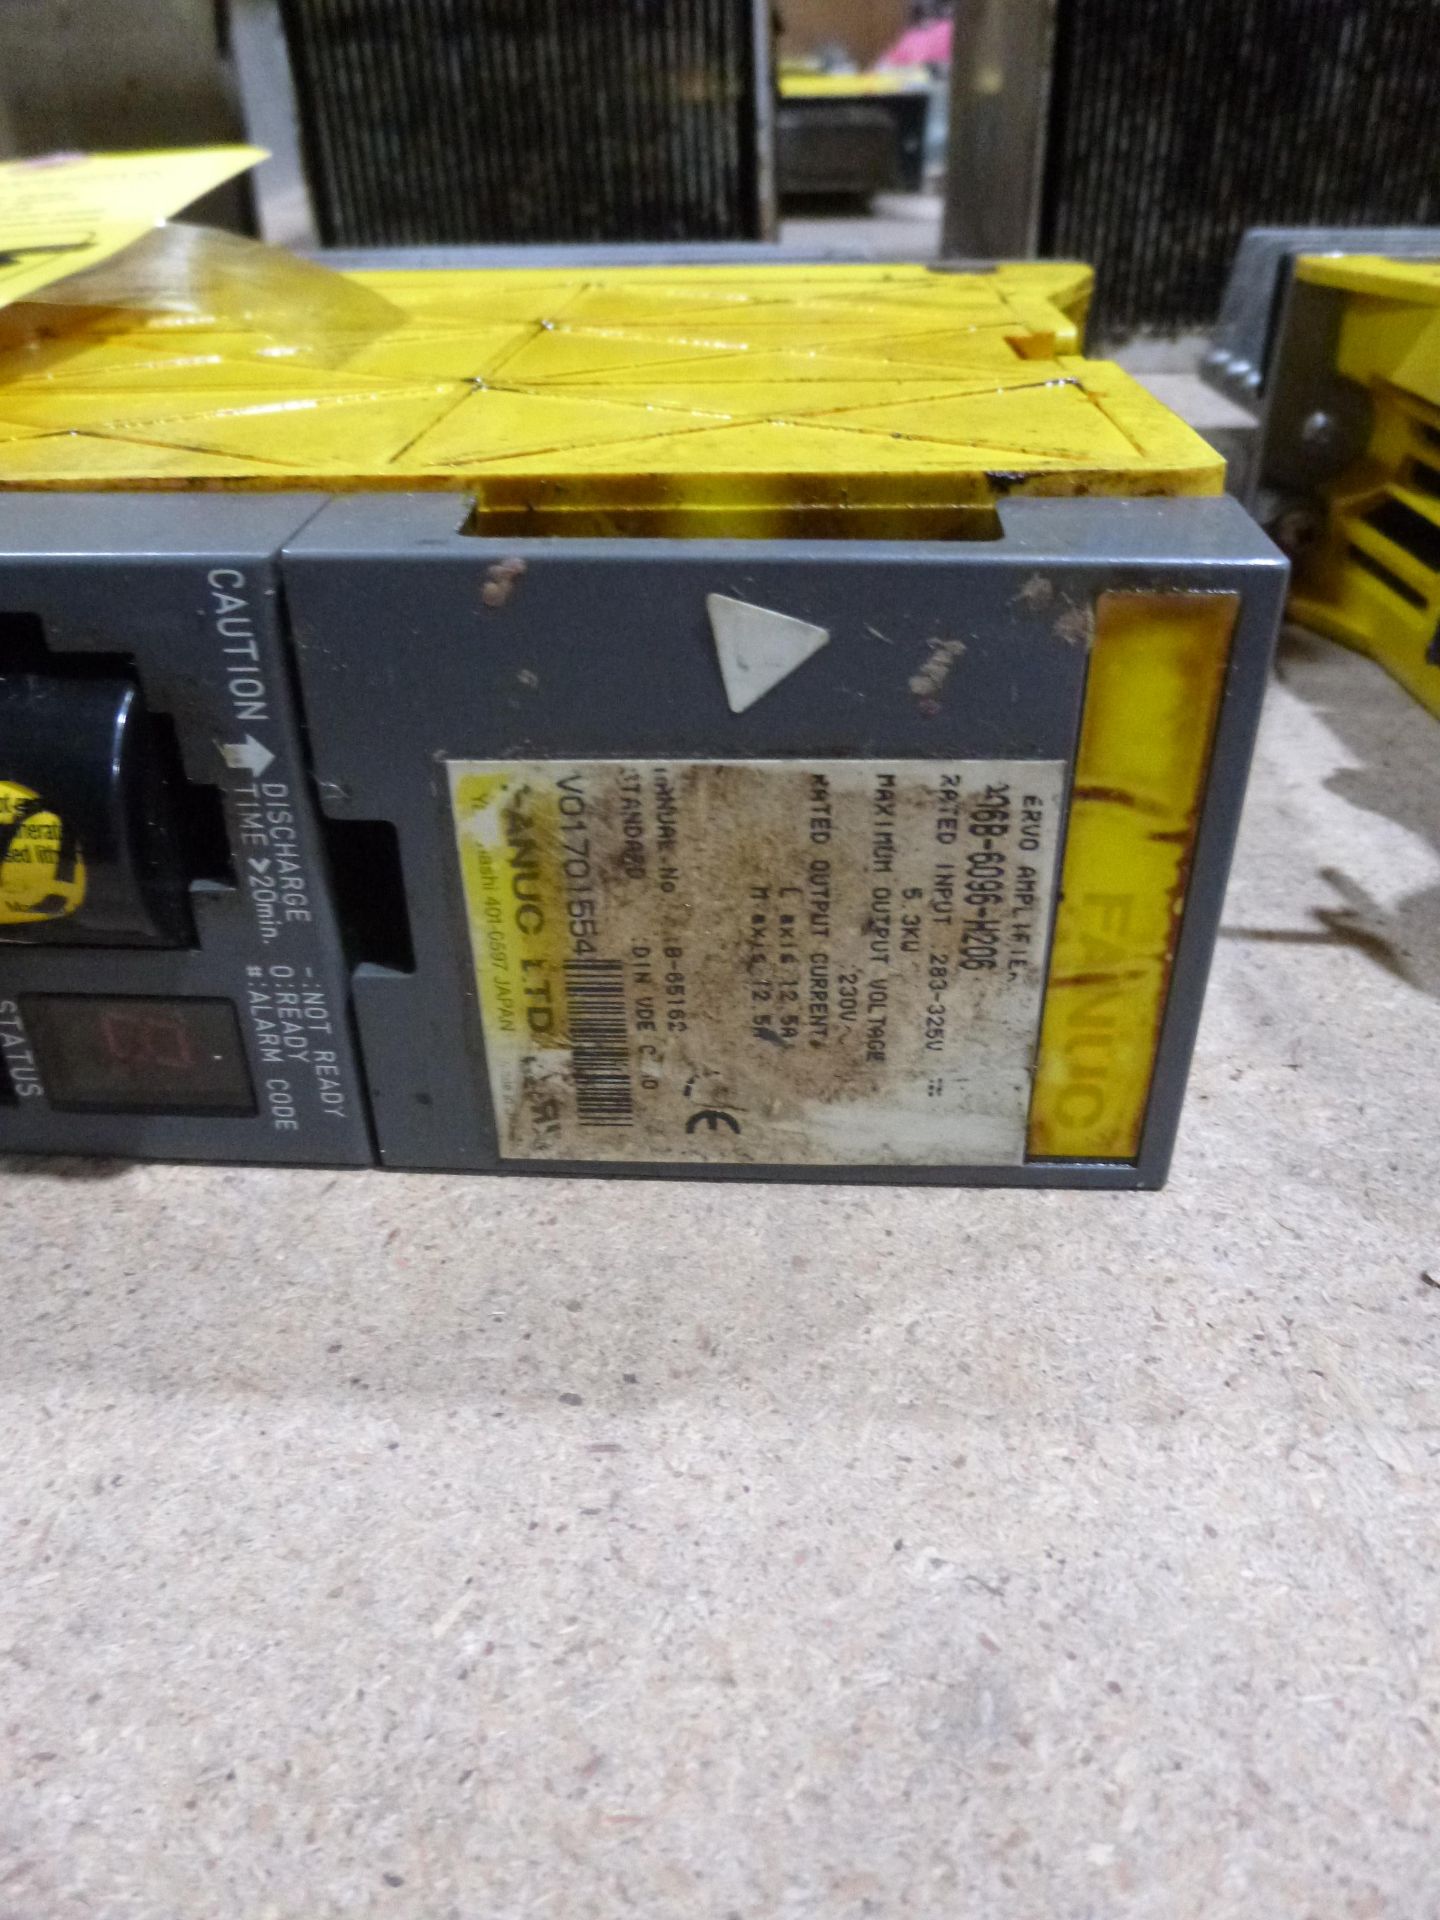 Fanuc servo amplifier module model A06B-6096-H206, as always with Brolyn LLC auctions, all lots - Image 2 of 2